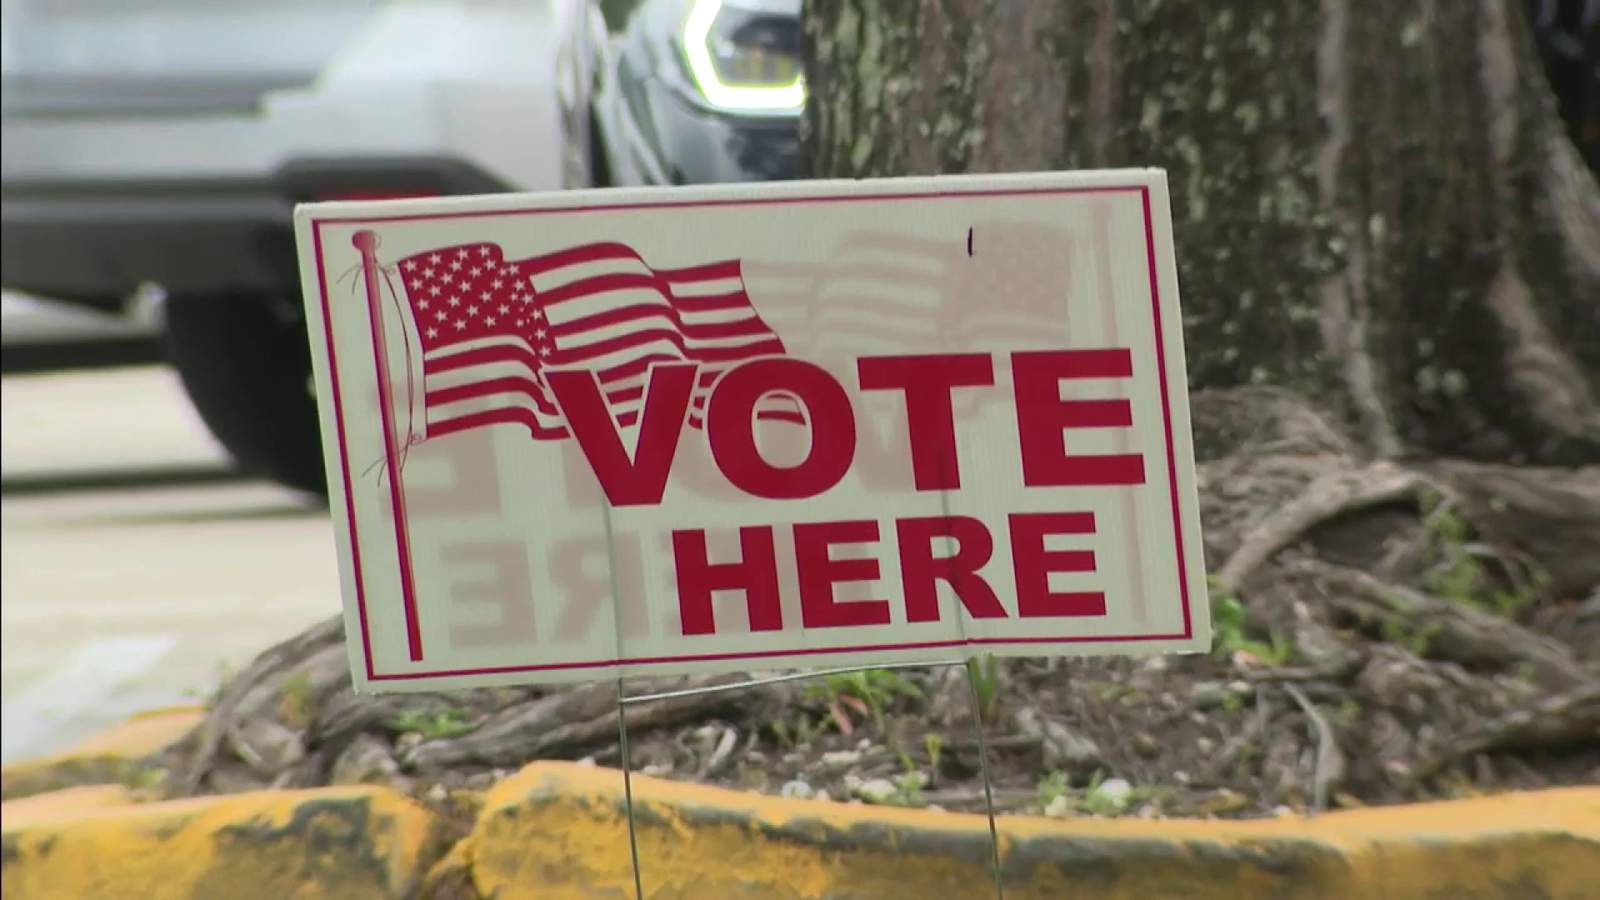 State of Florida fires back in Amendment 3 lawsuit